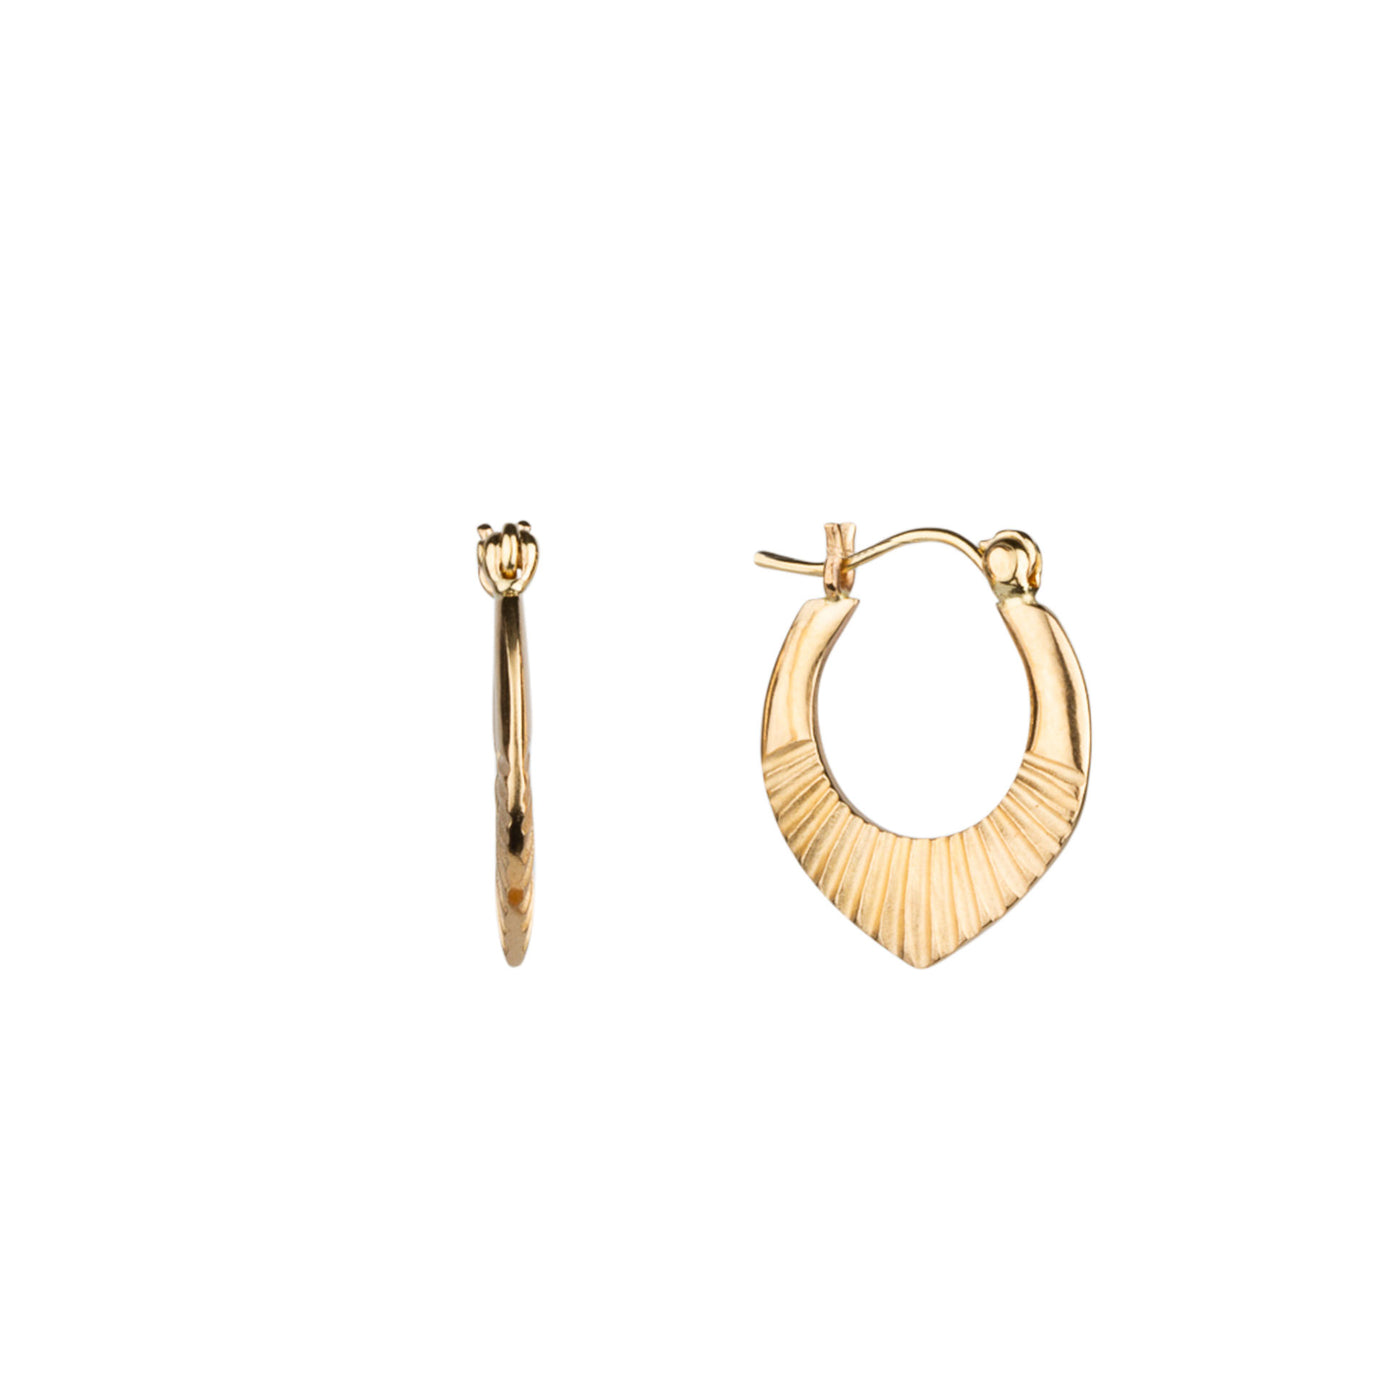 Side view of 14k yellow gold hinged hoop earrings with carved sunburst motif on a white background